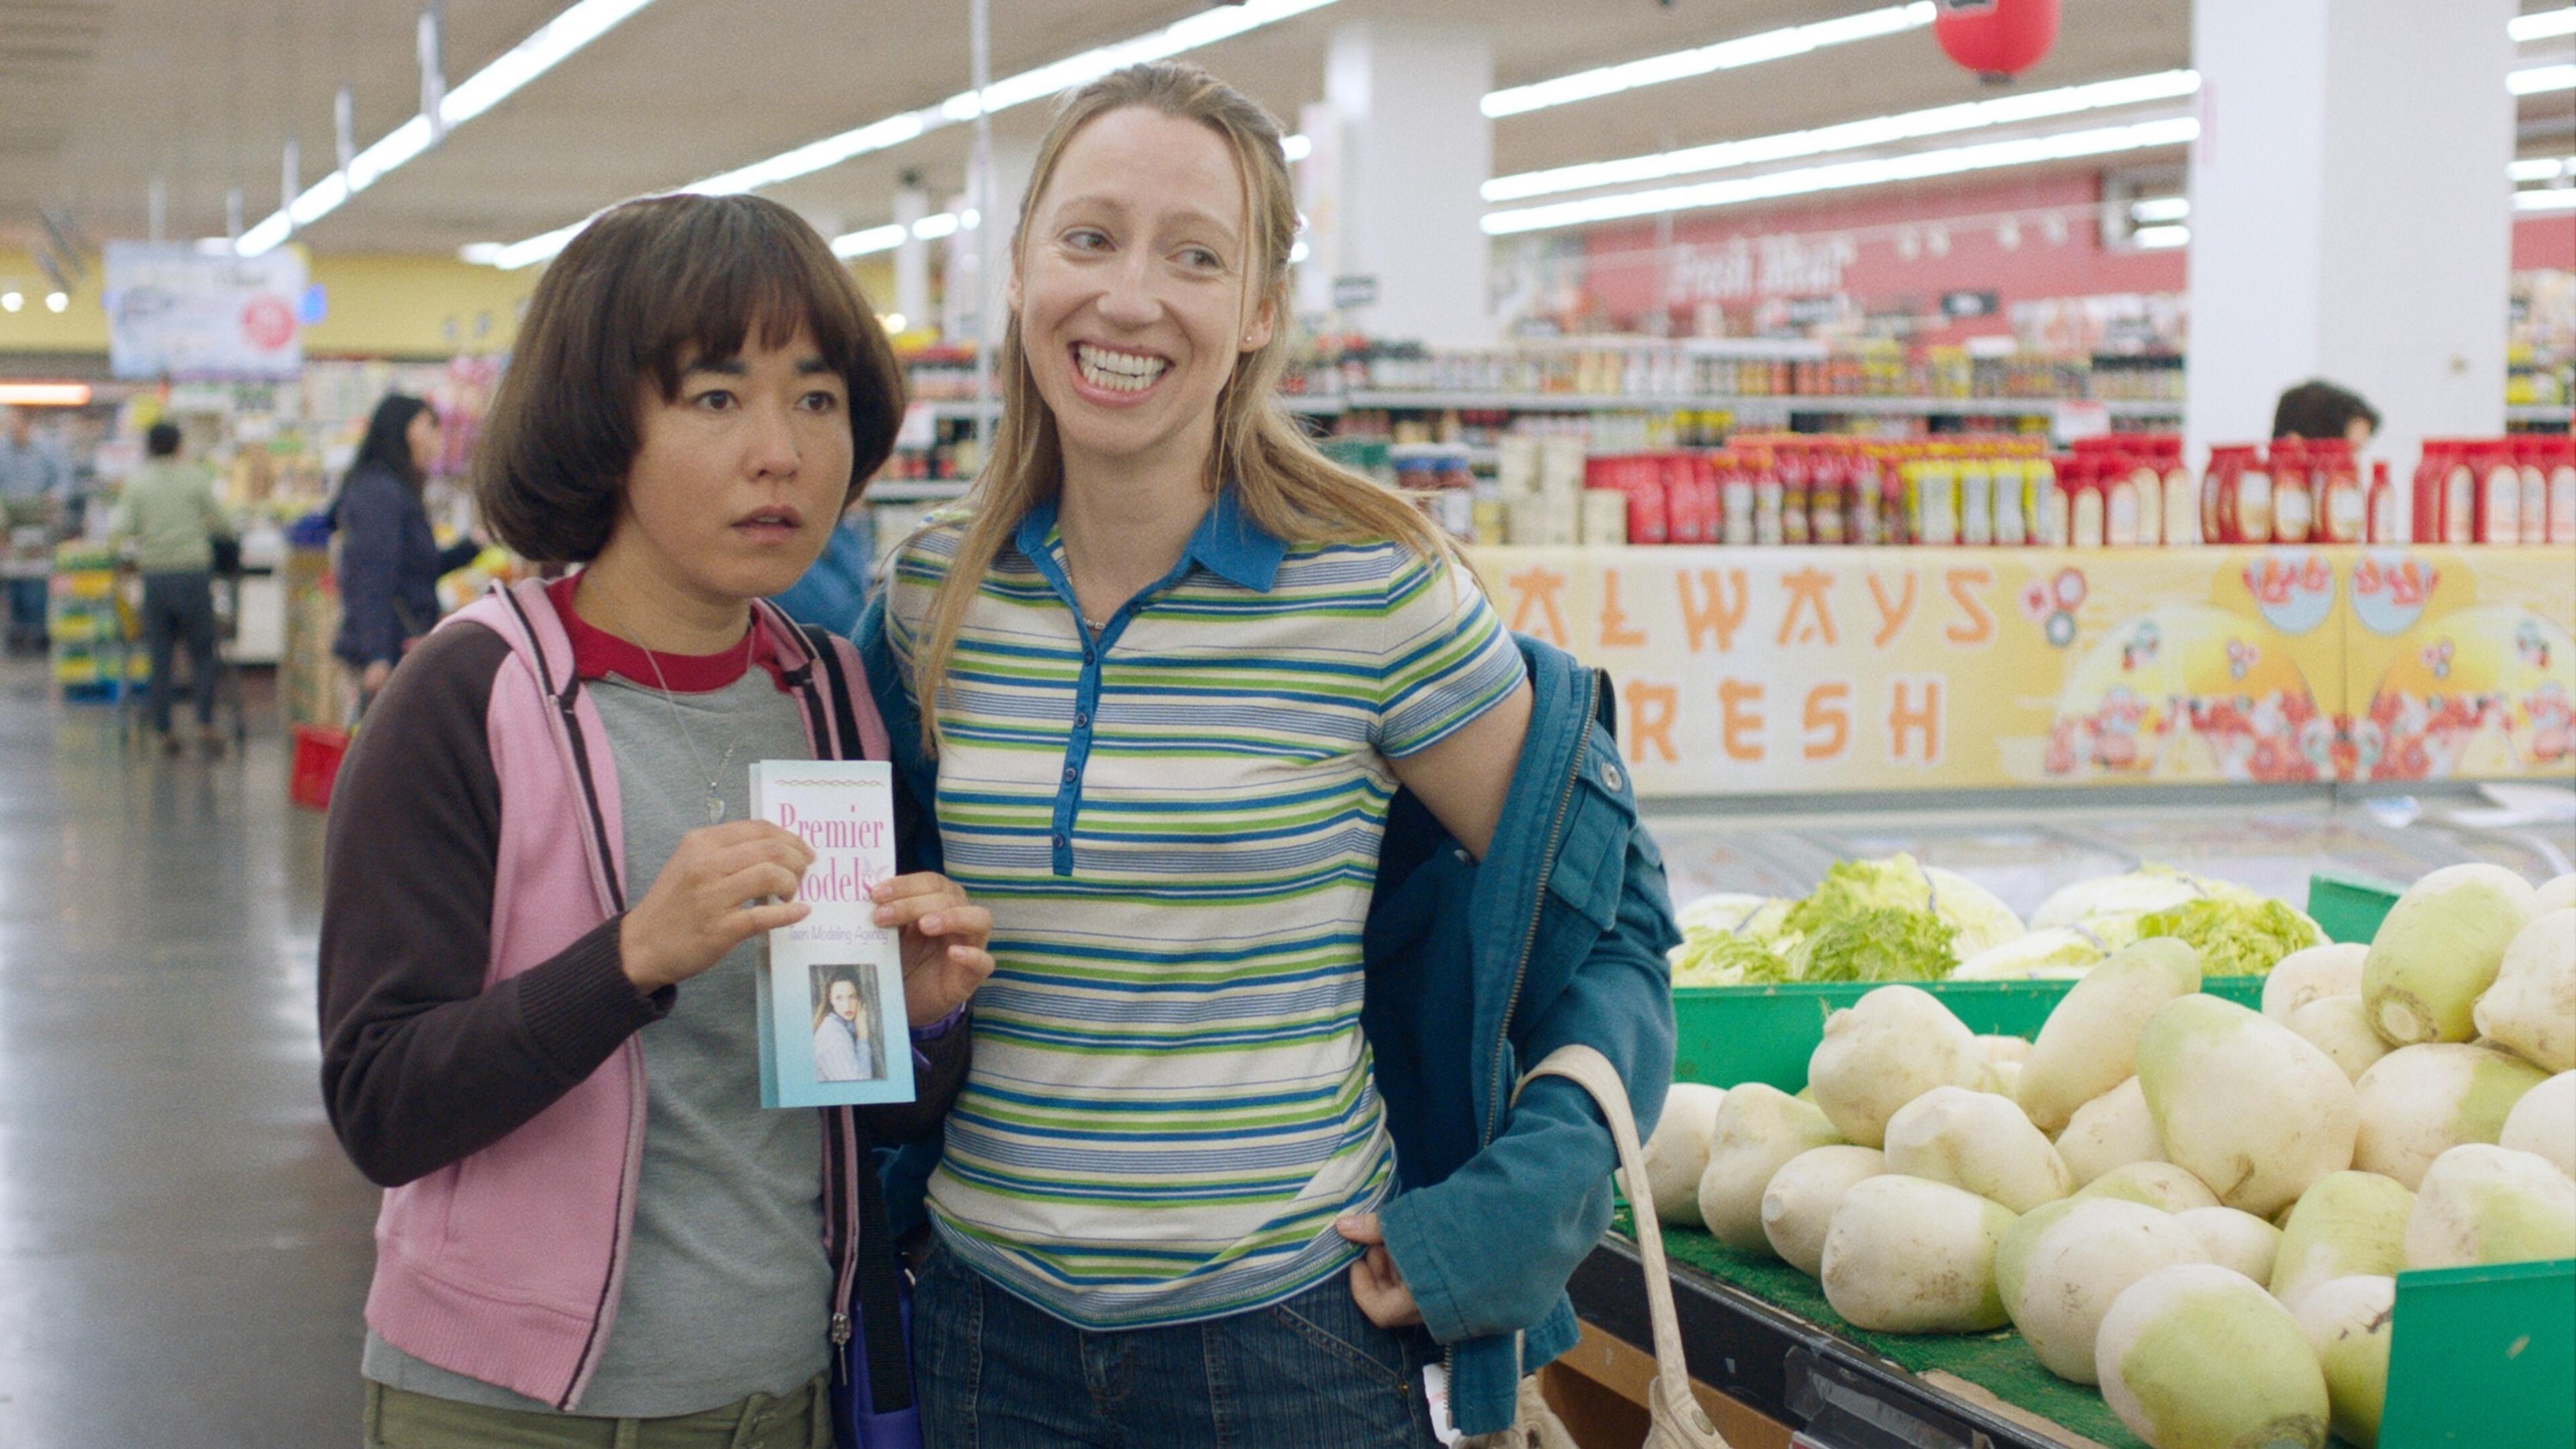 Maya Erskine and Anna Konkle stand in a grocery store